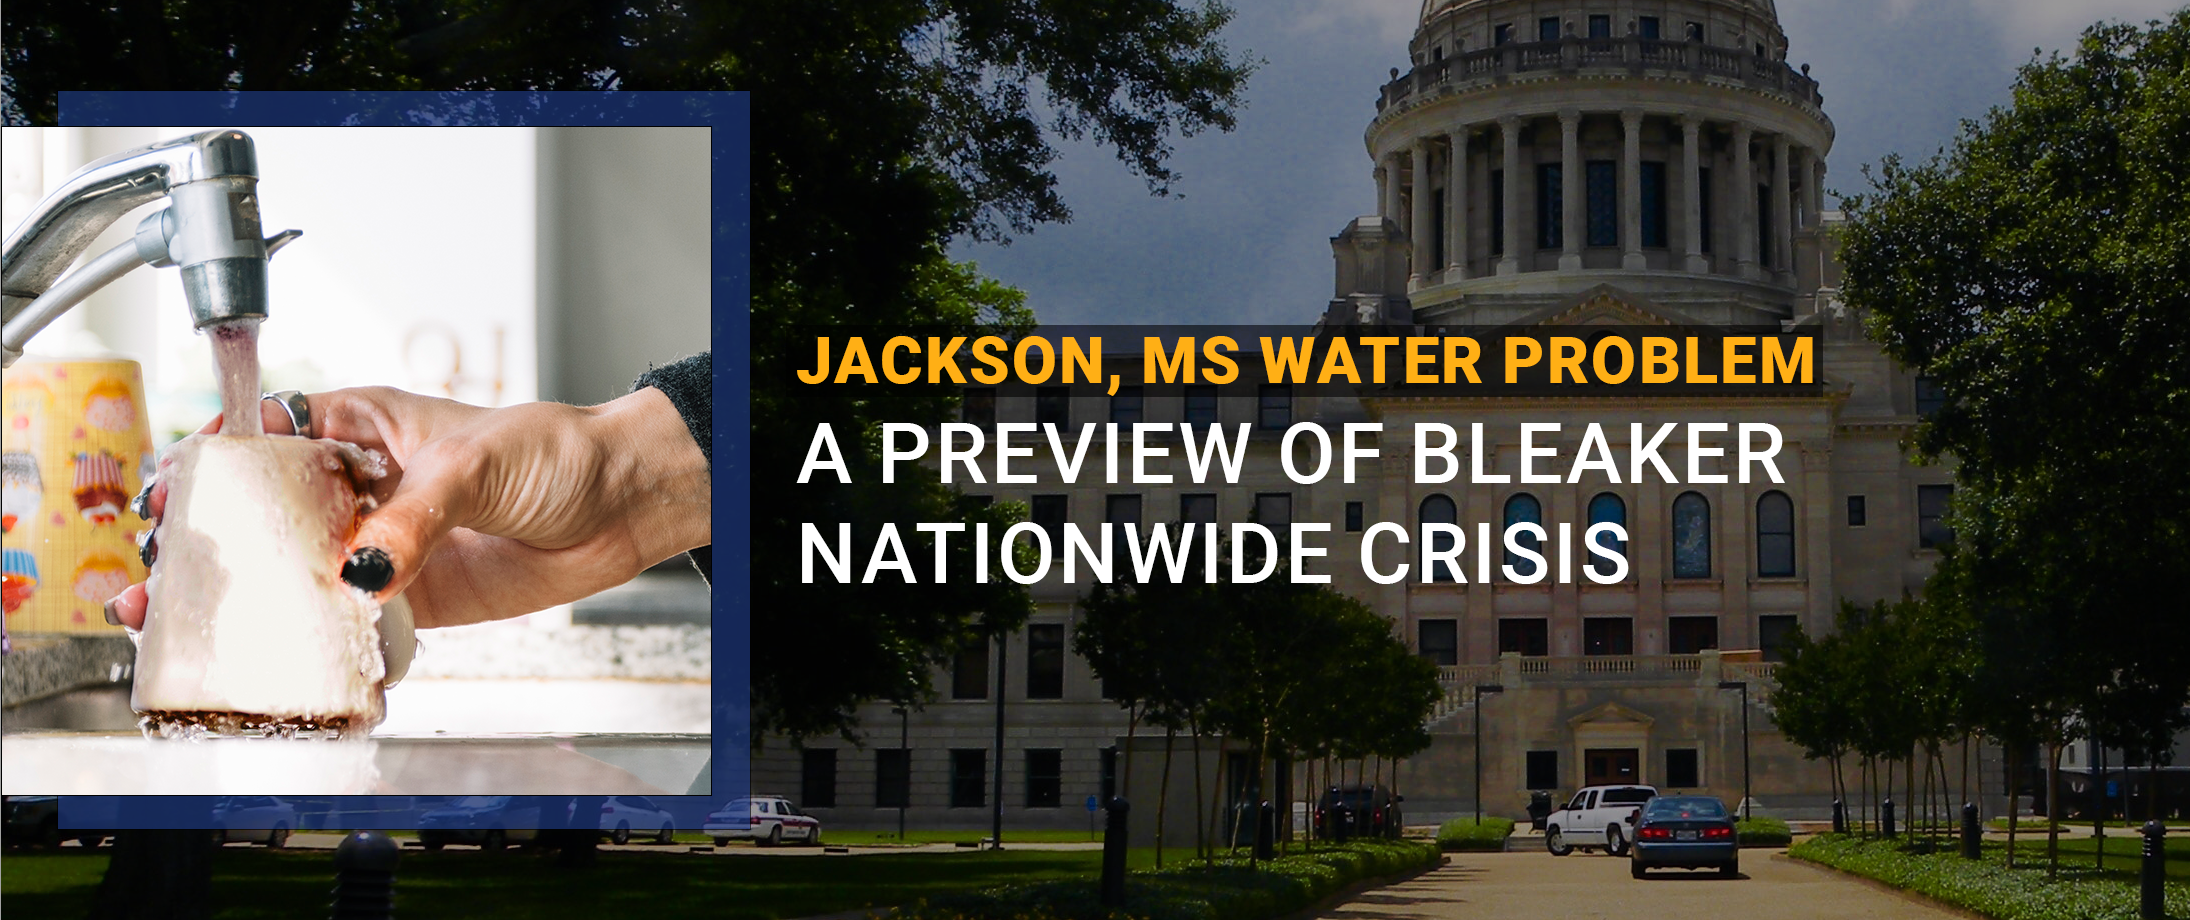 Jackson MS Water Problem a Preview of Bleaker Nationwide Crisis